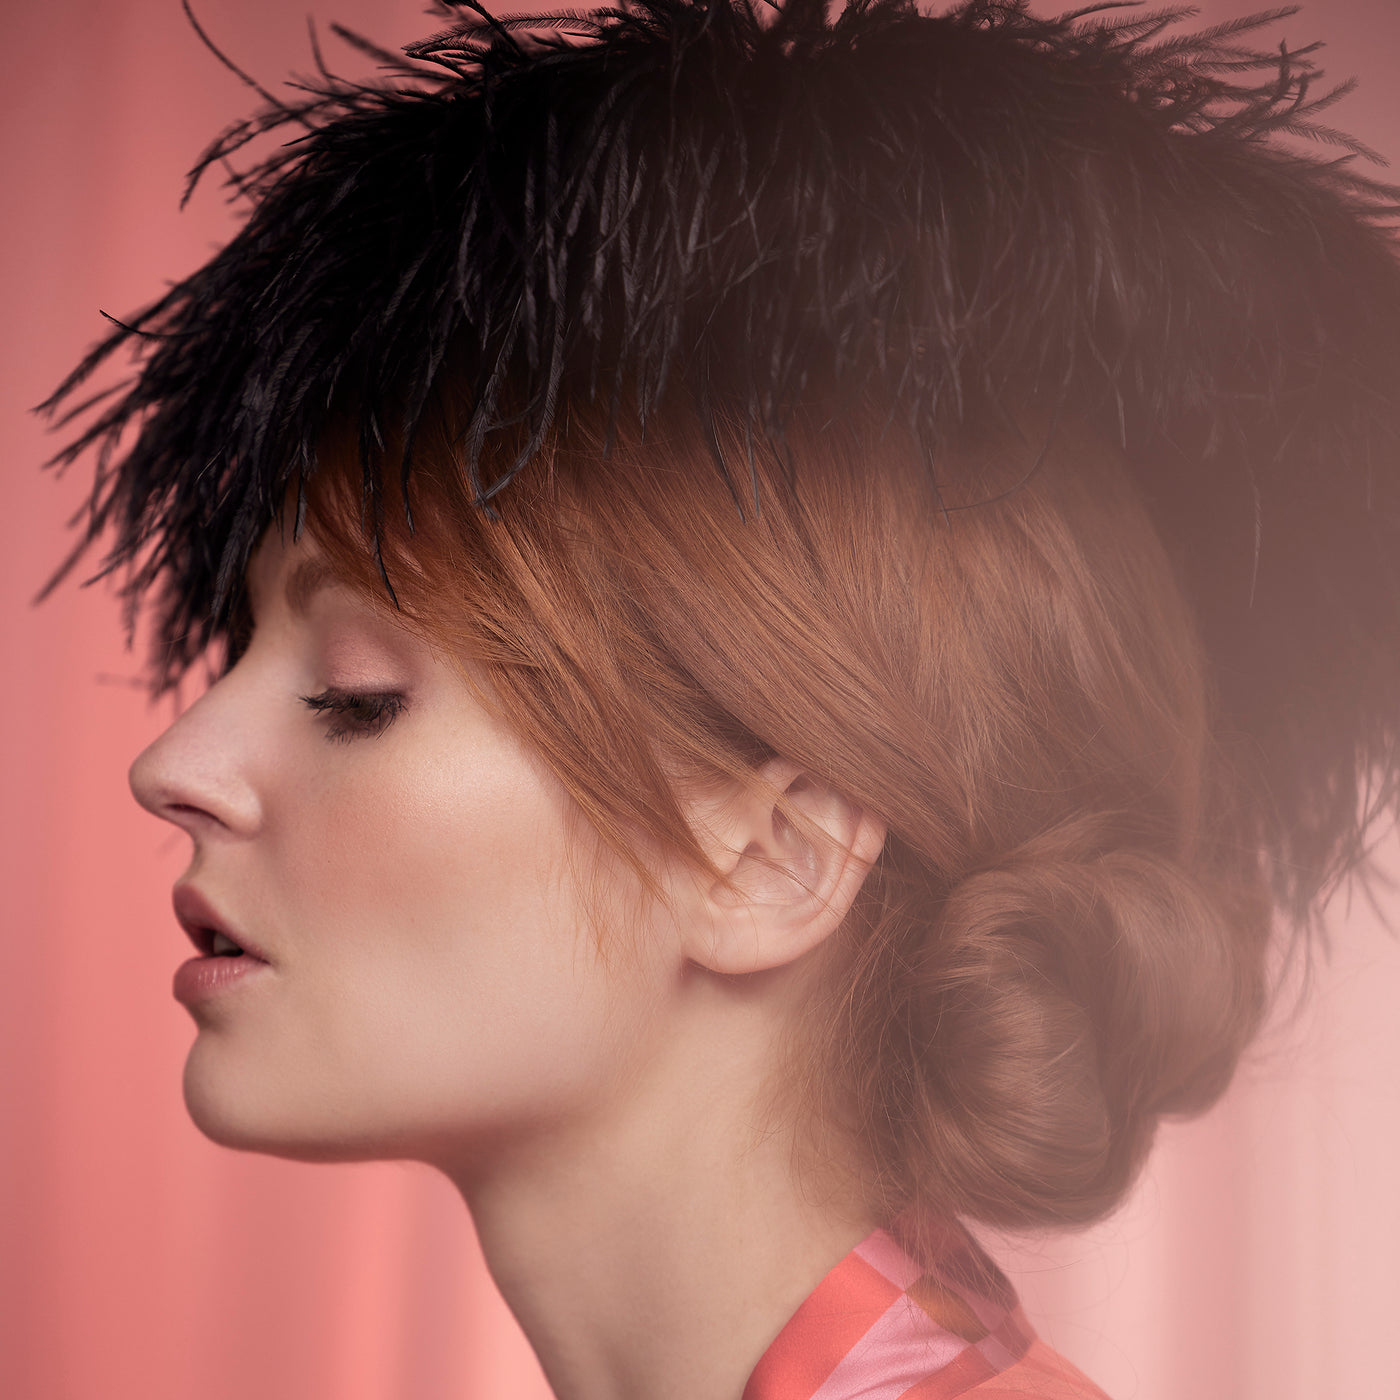 Woman with red hair wearing a black ostrich feather disc